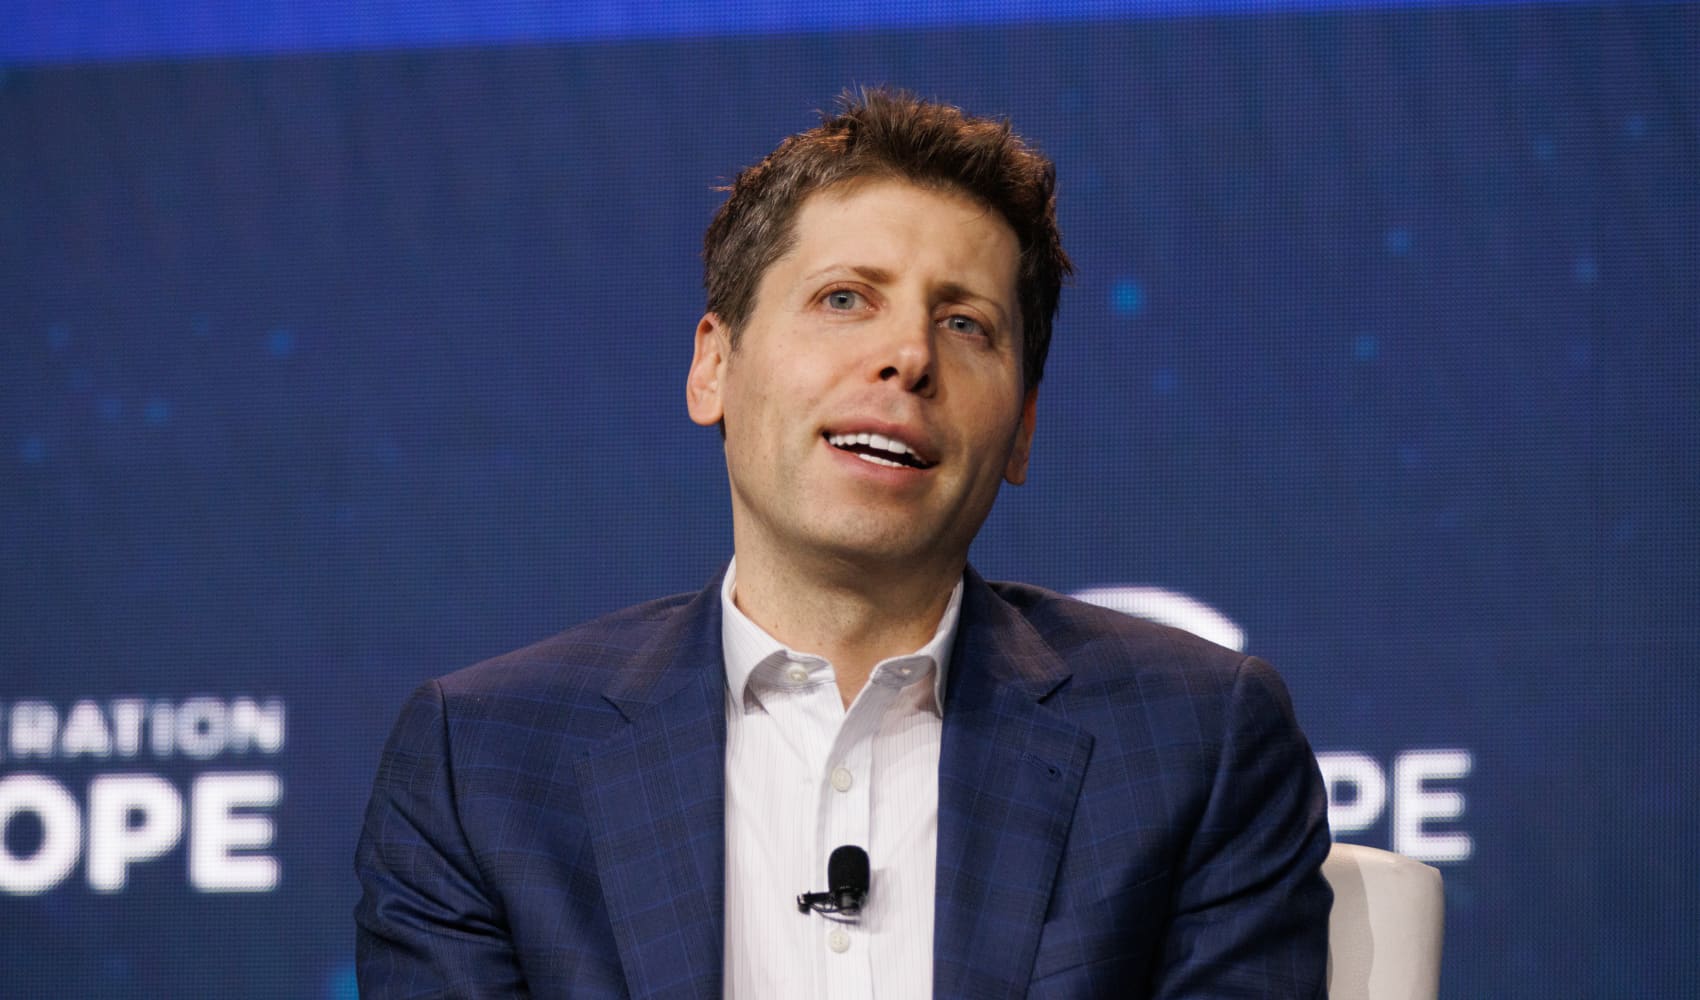 ChatGPT is particularly useful for people in these 3 industries, says
OpenAI CEO Sam Altman